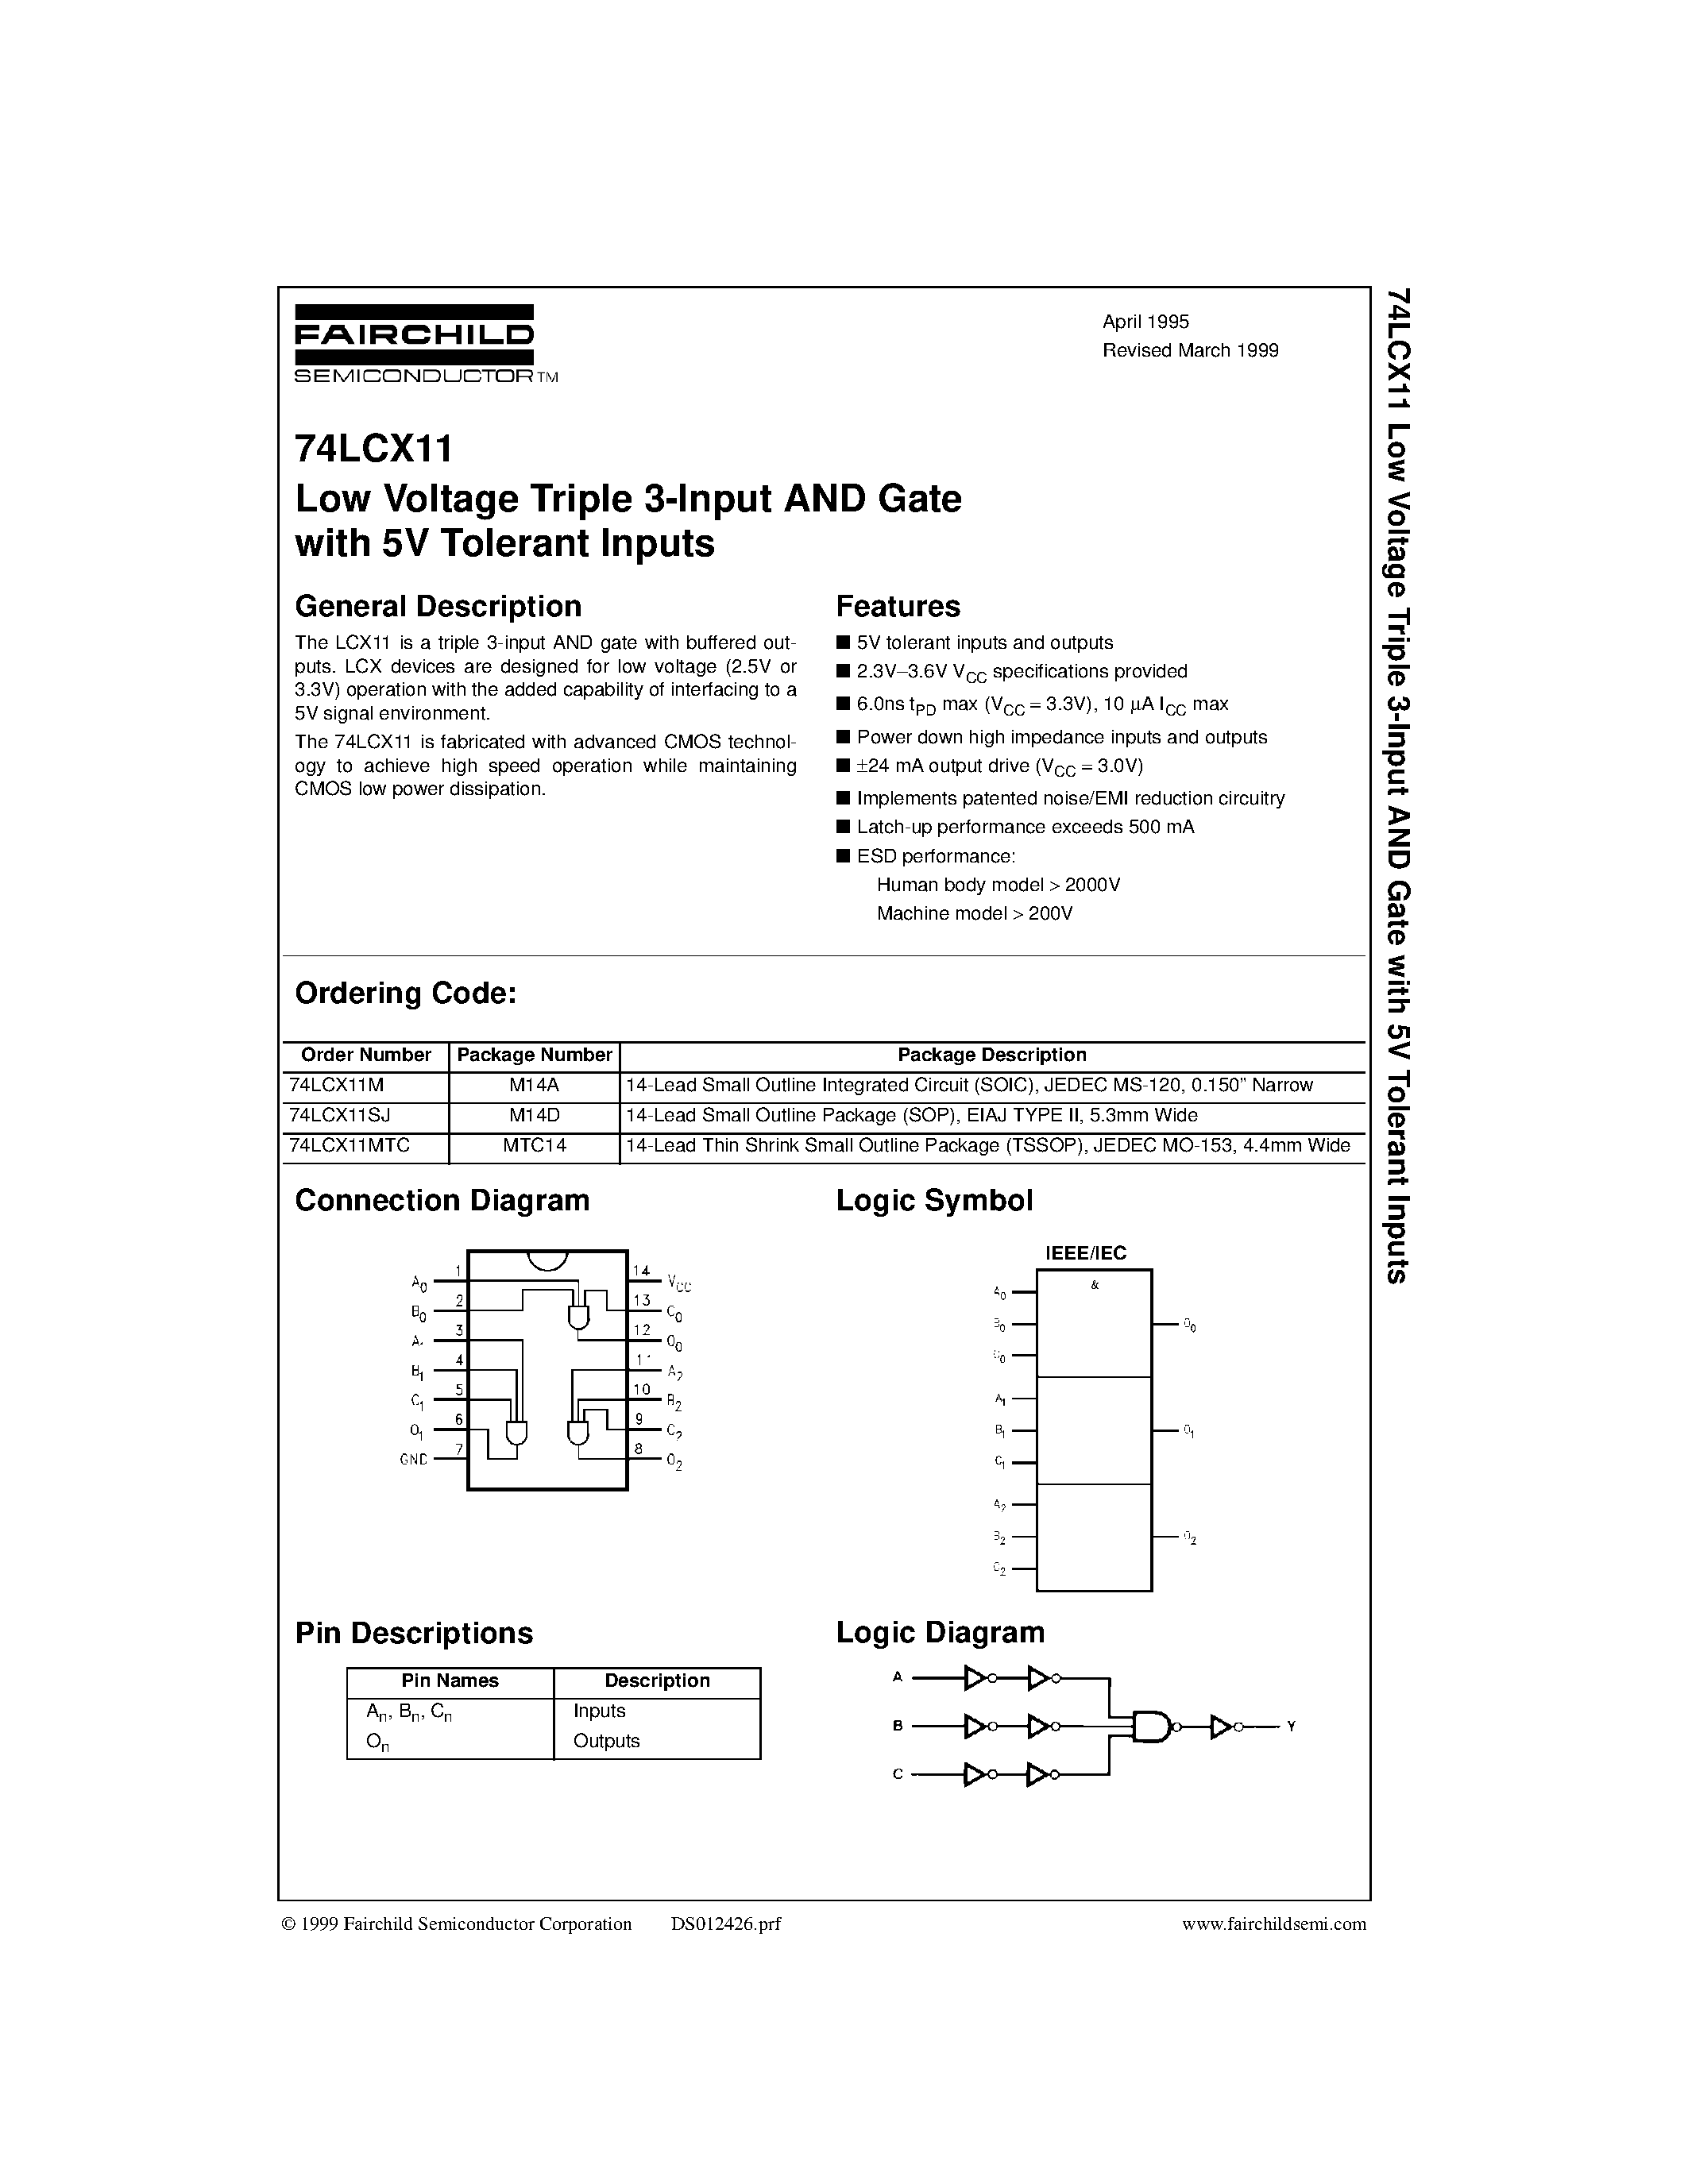 Datasheet 74LCX11 - Low Voltage Triple 3-Input AND Gate with 5V Tolerant Inputs page 1